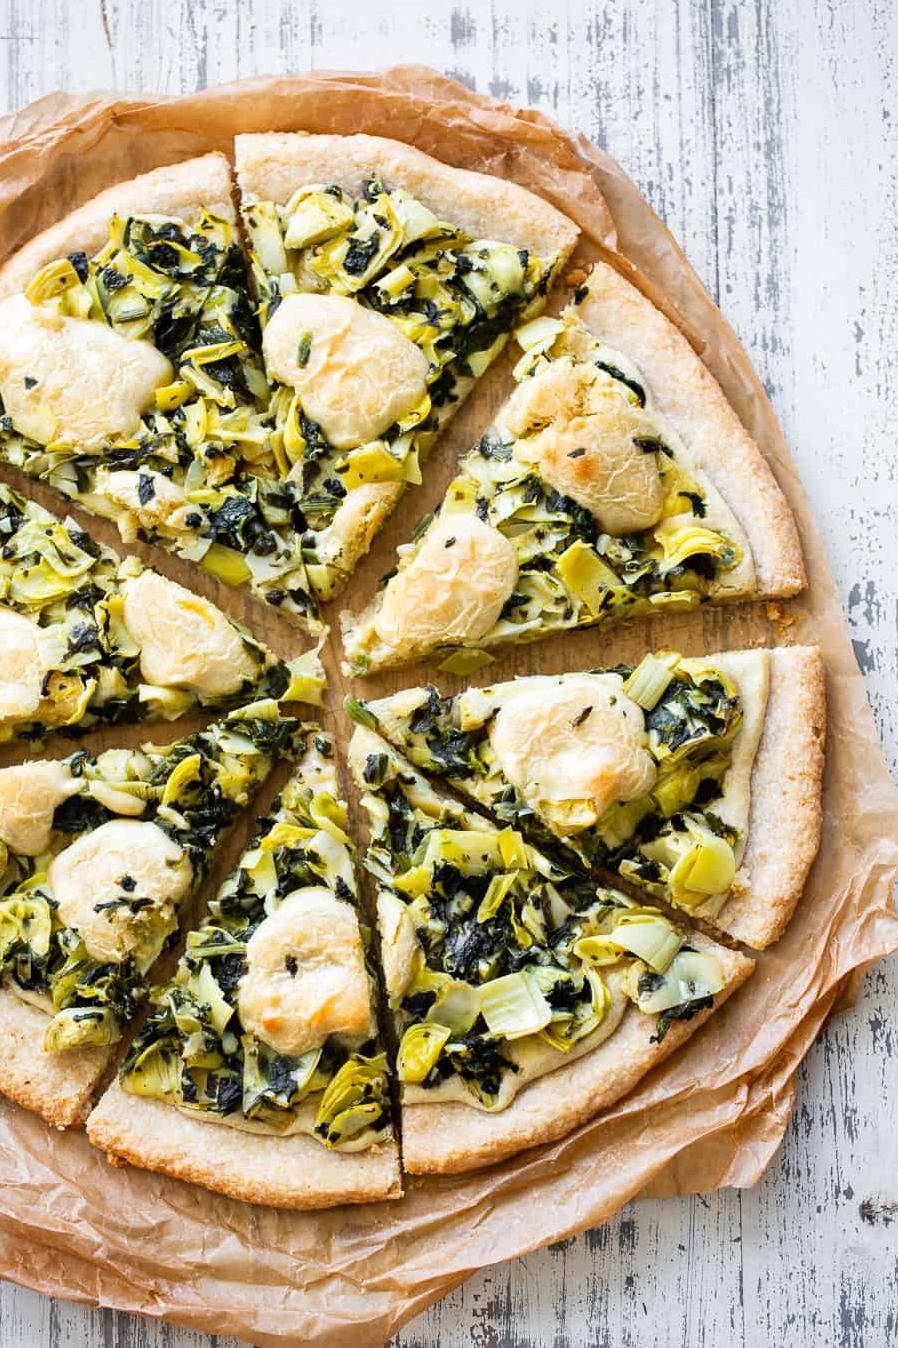  When life gives you spinach and artichokes, make pizza!